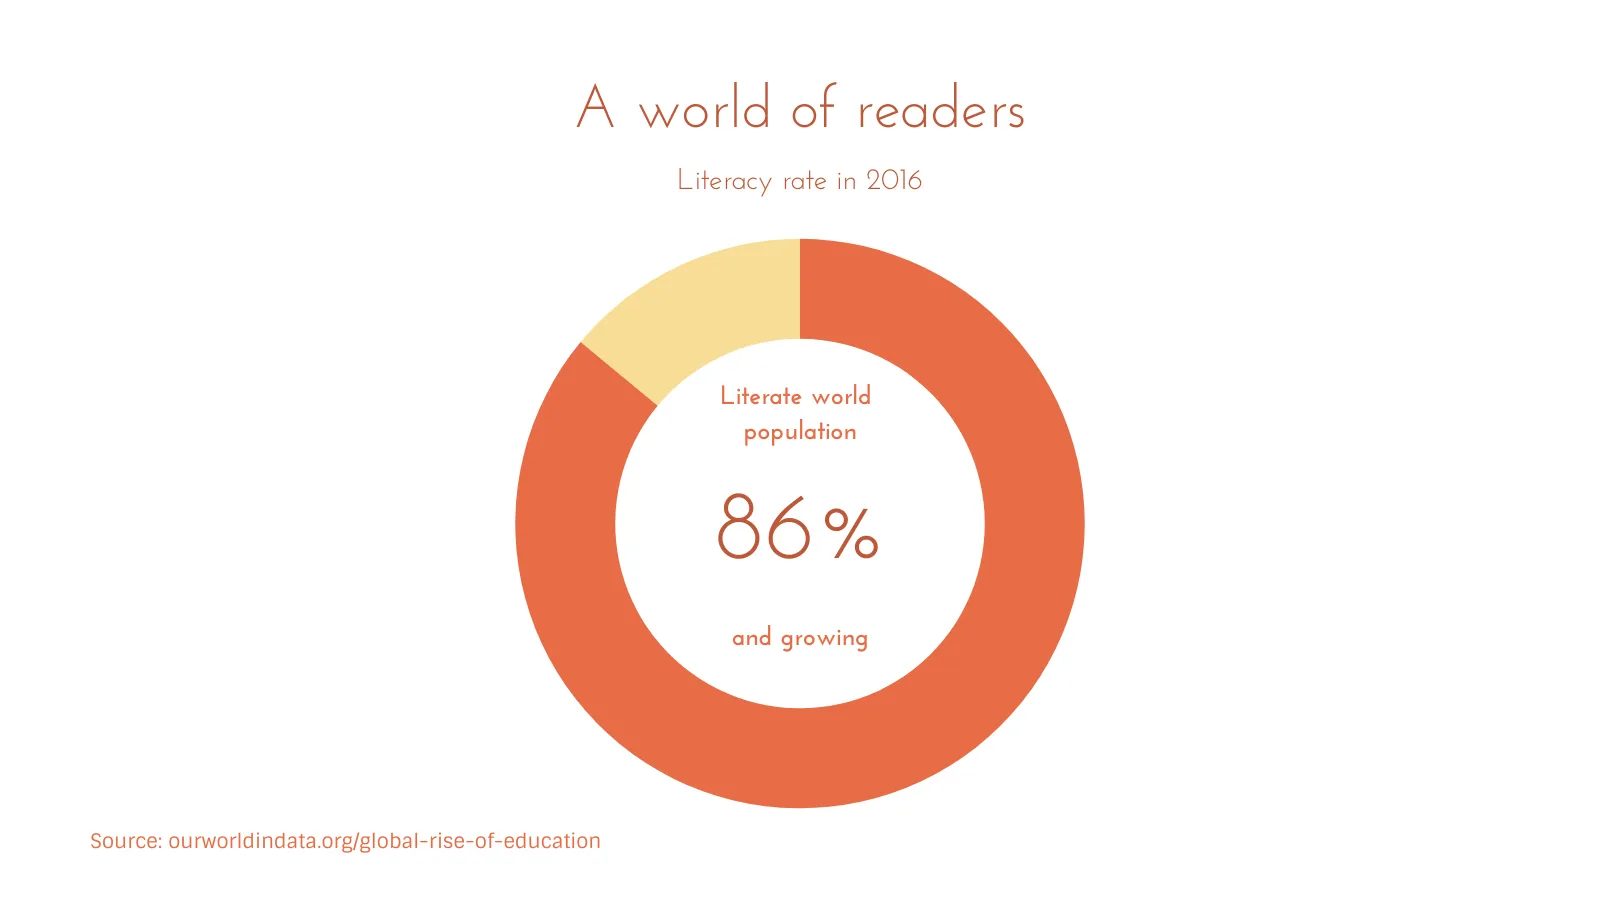 Radial Percentage example: A world of readers